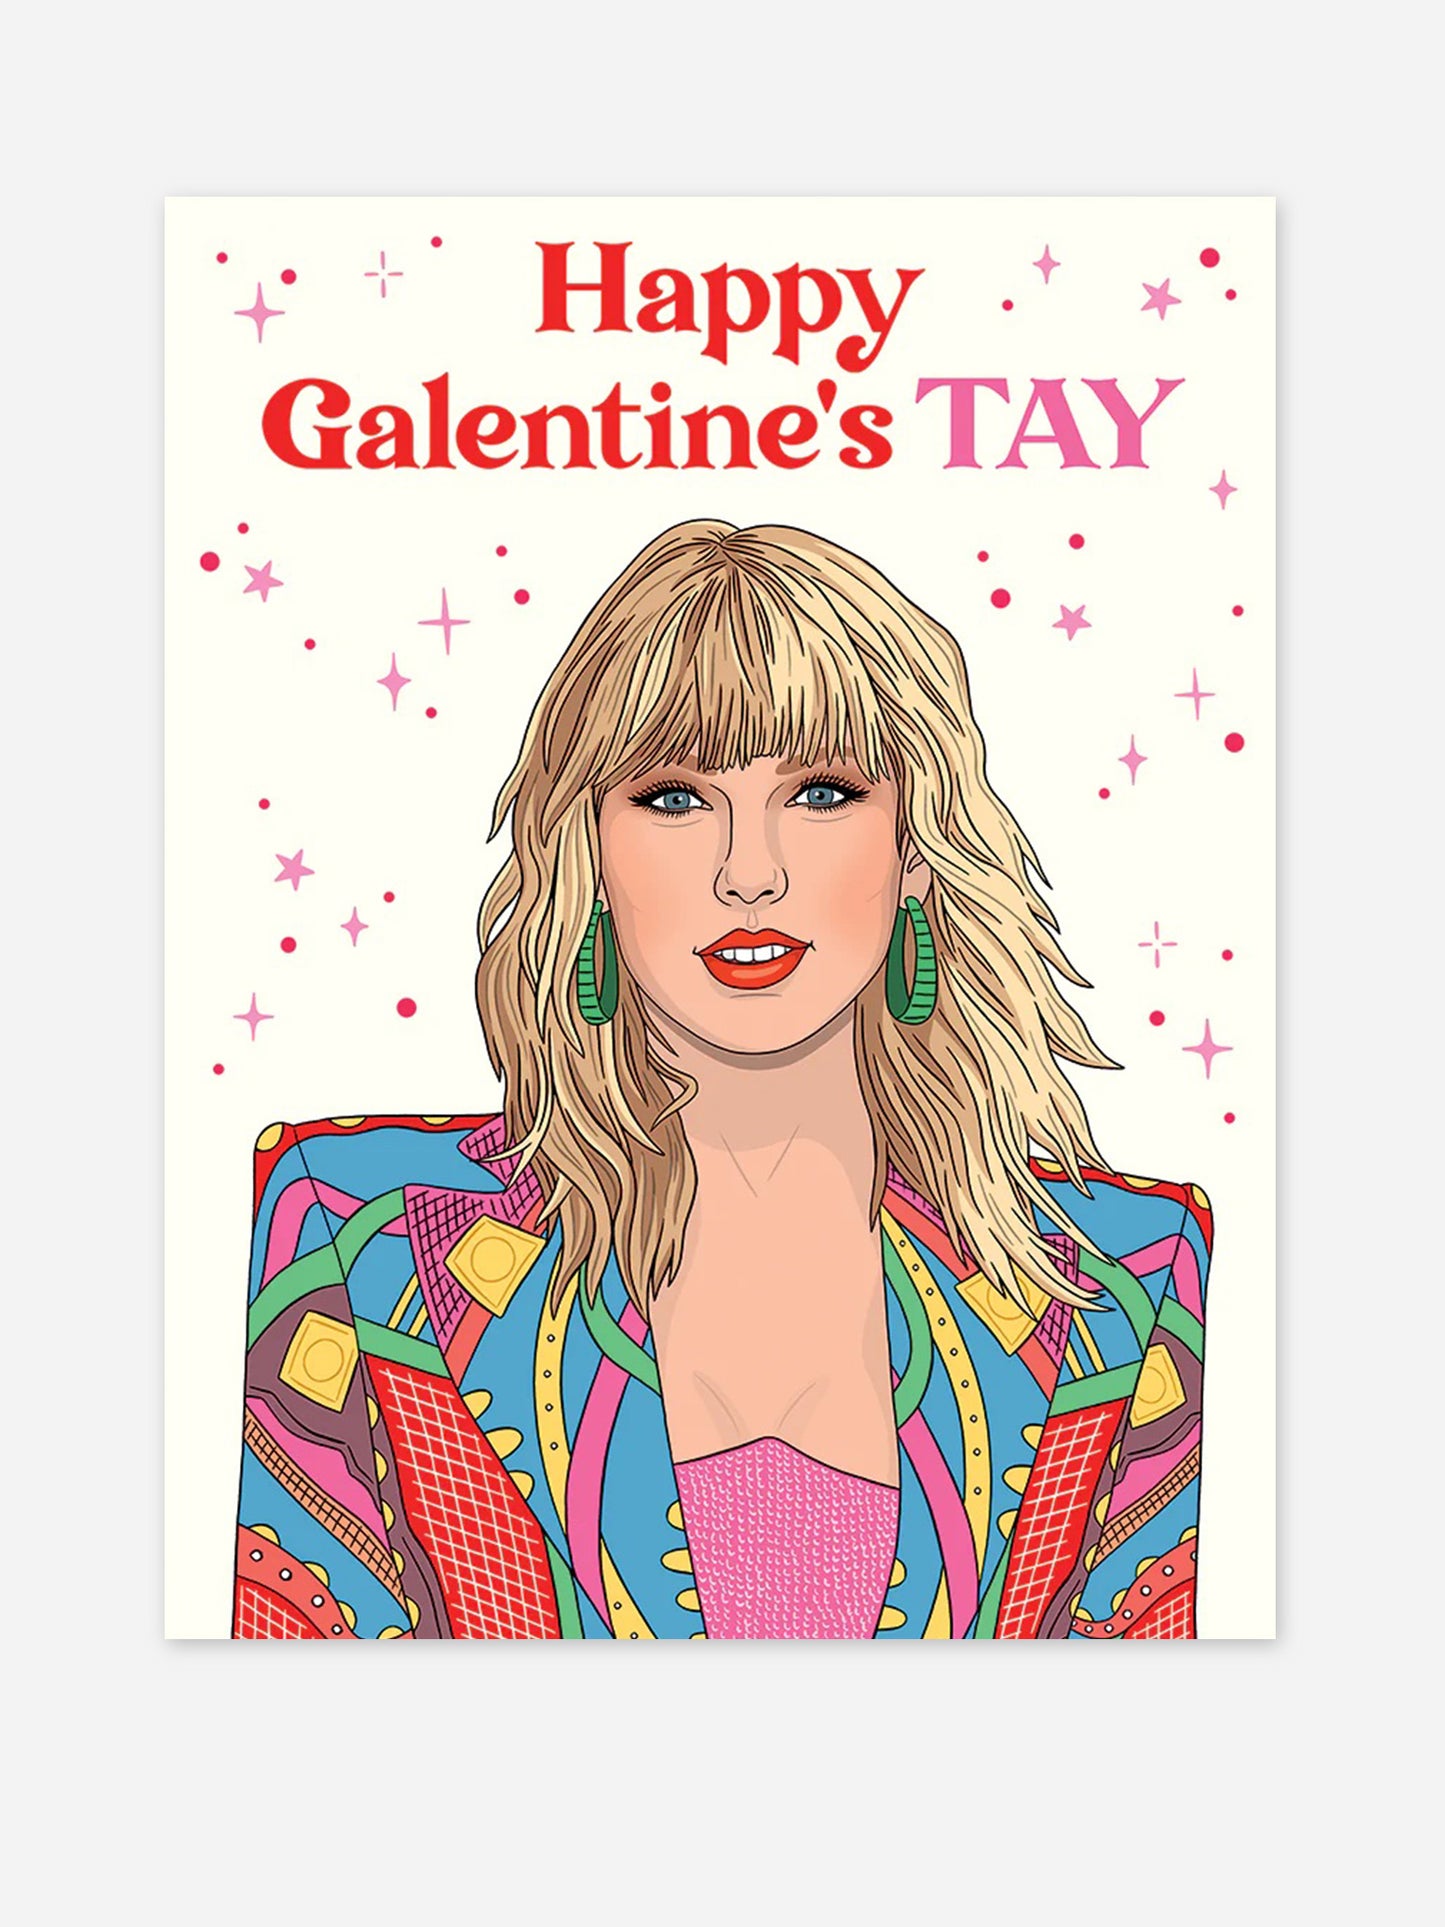 The Found Happy Galentine's TAY Card